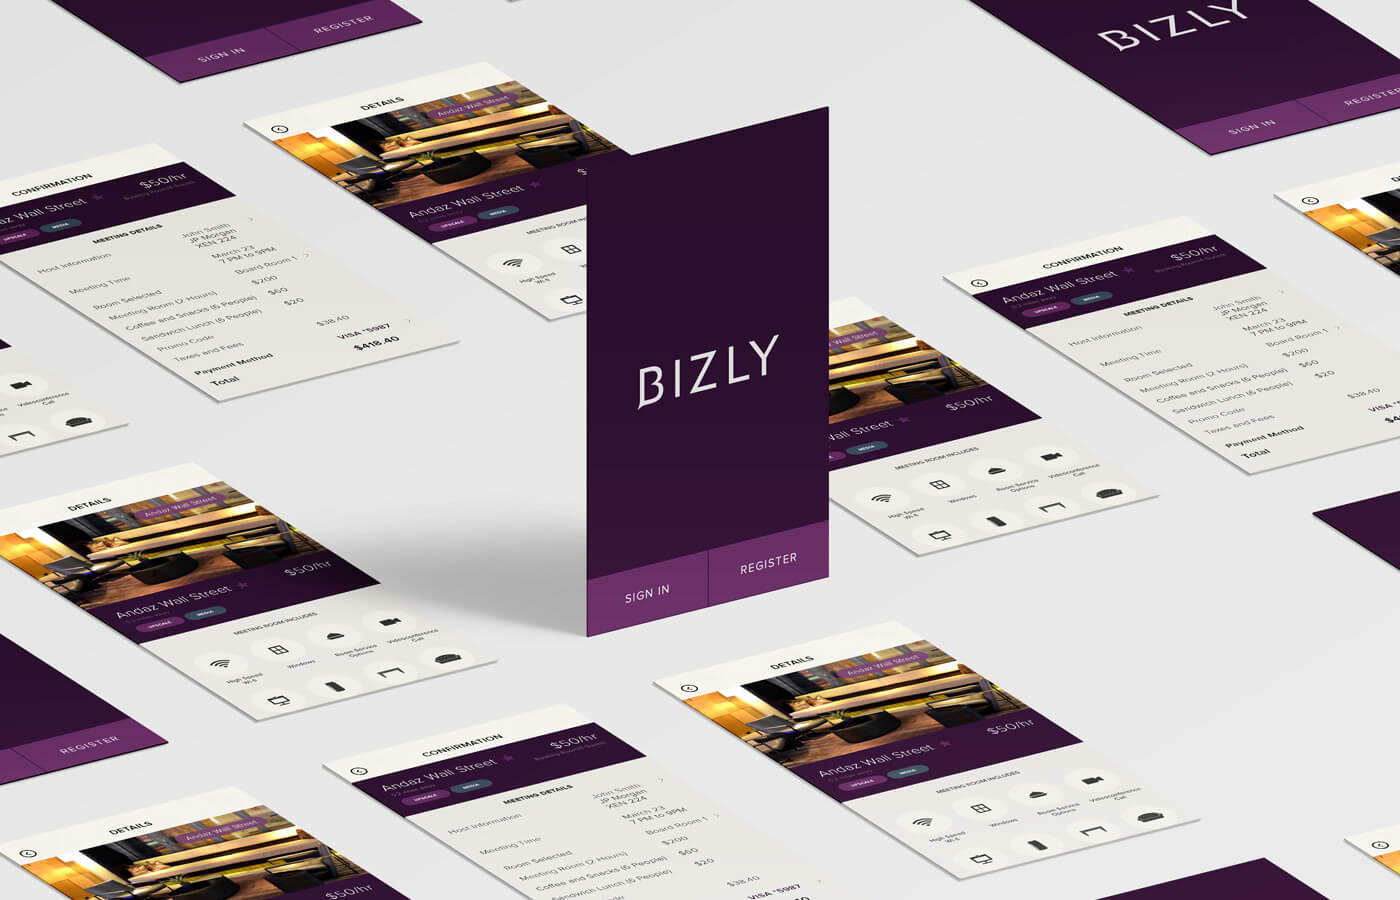 Bizly - sign in form